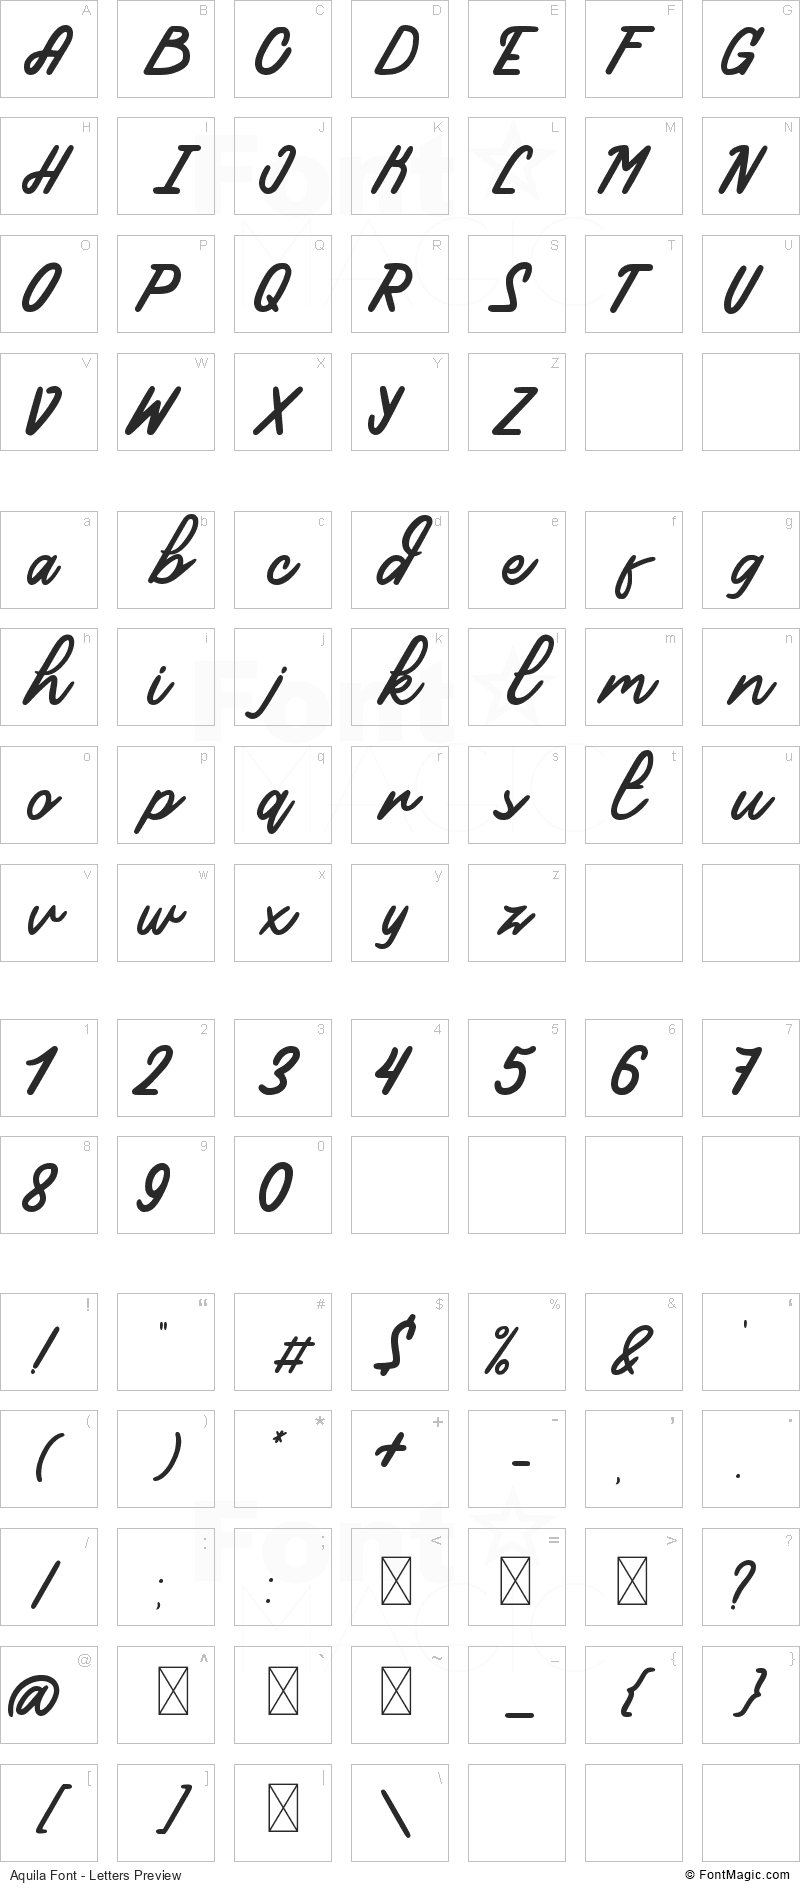 Aquila Font - All Latters Preview Chart